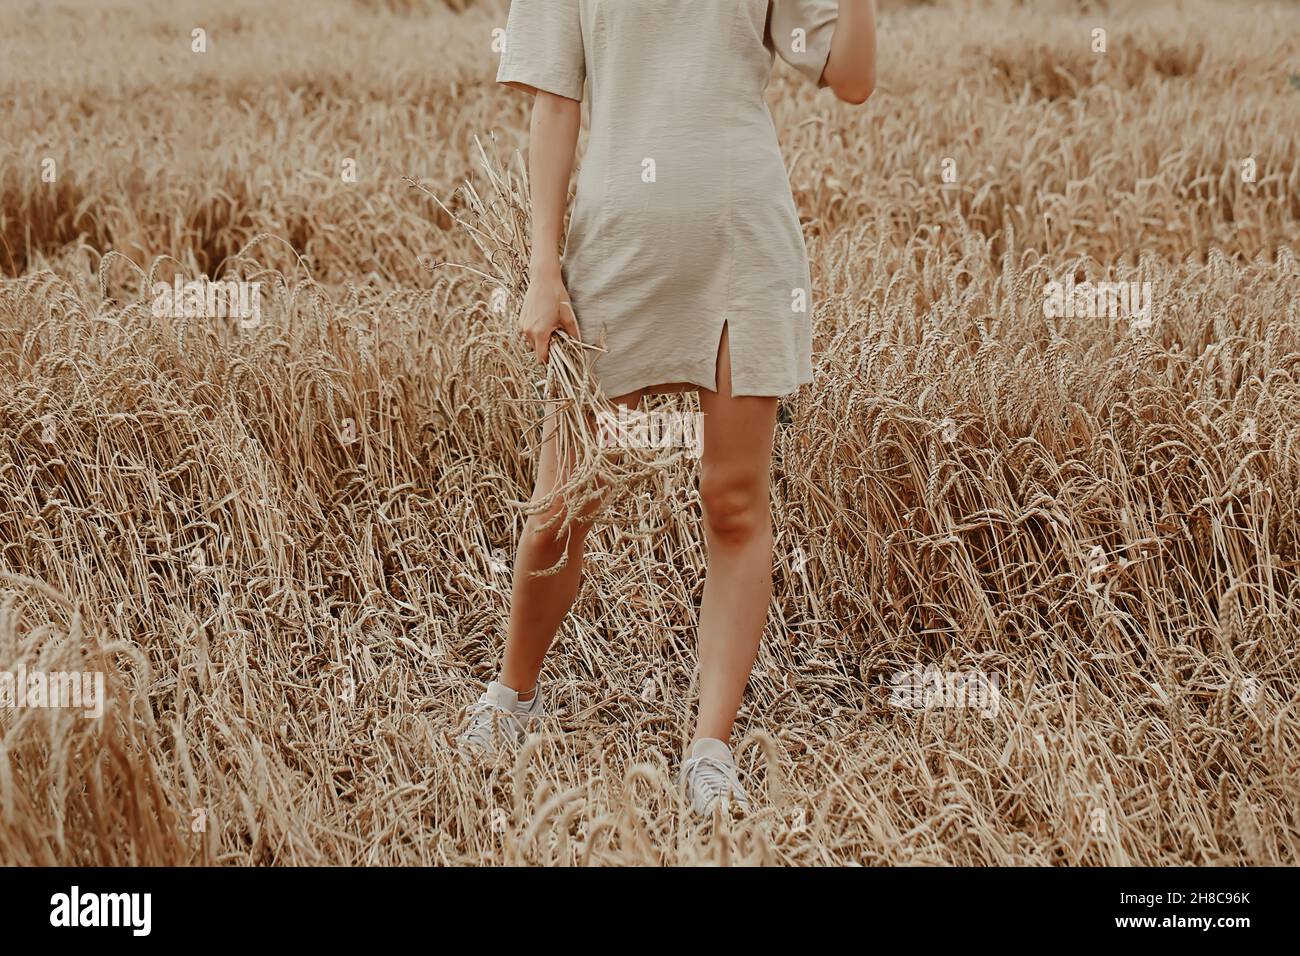 young woman stanyoung girl in a short beige dress stands in a field with wheat.ds in a field with wheat. Stock Photo